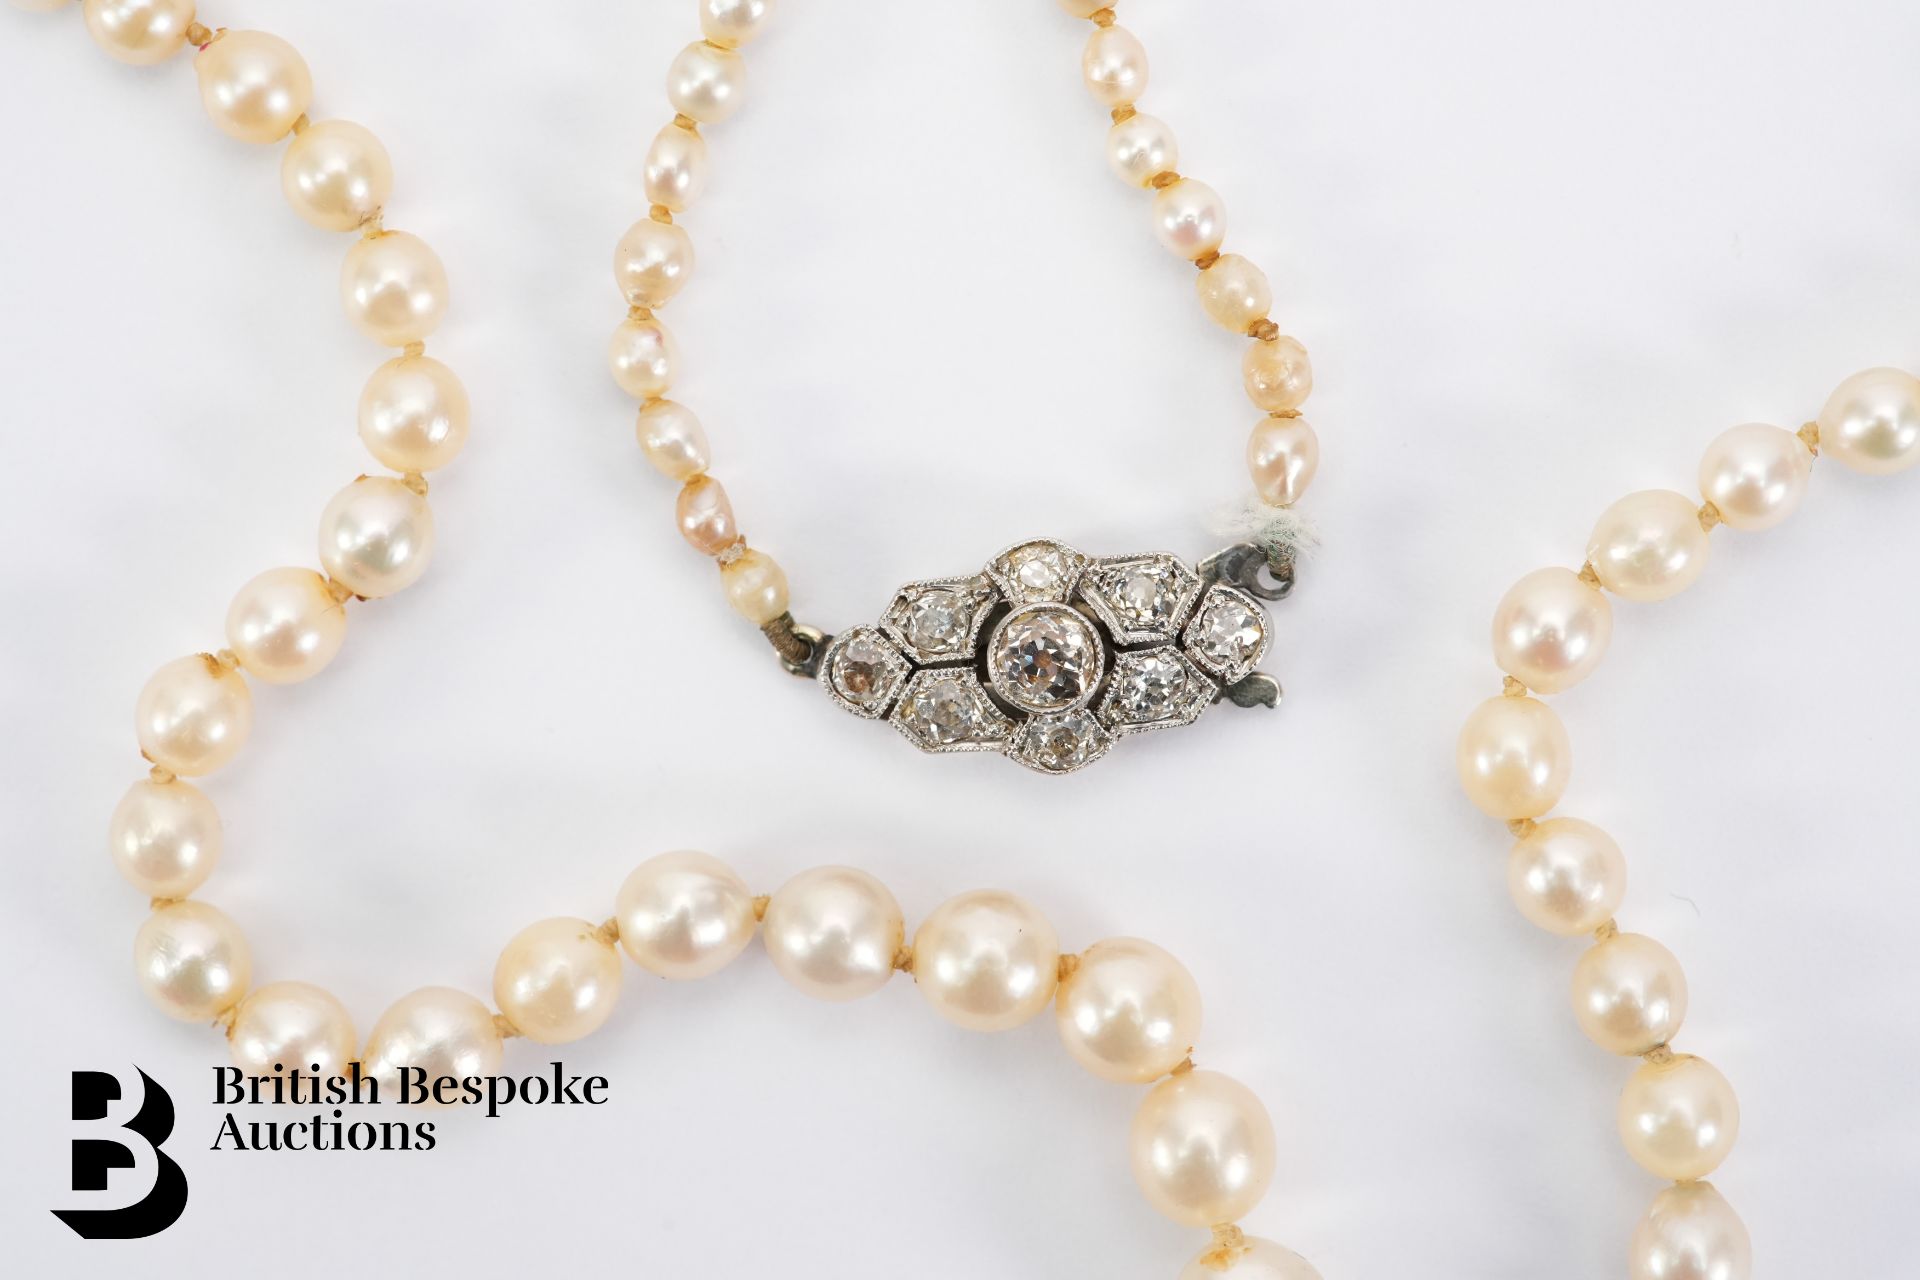 Set of Graduated Pearl Necklace - Image 3 of 3